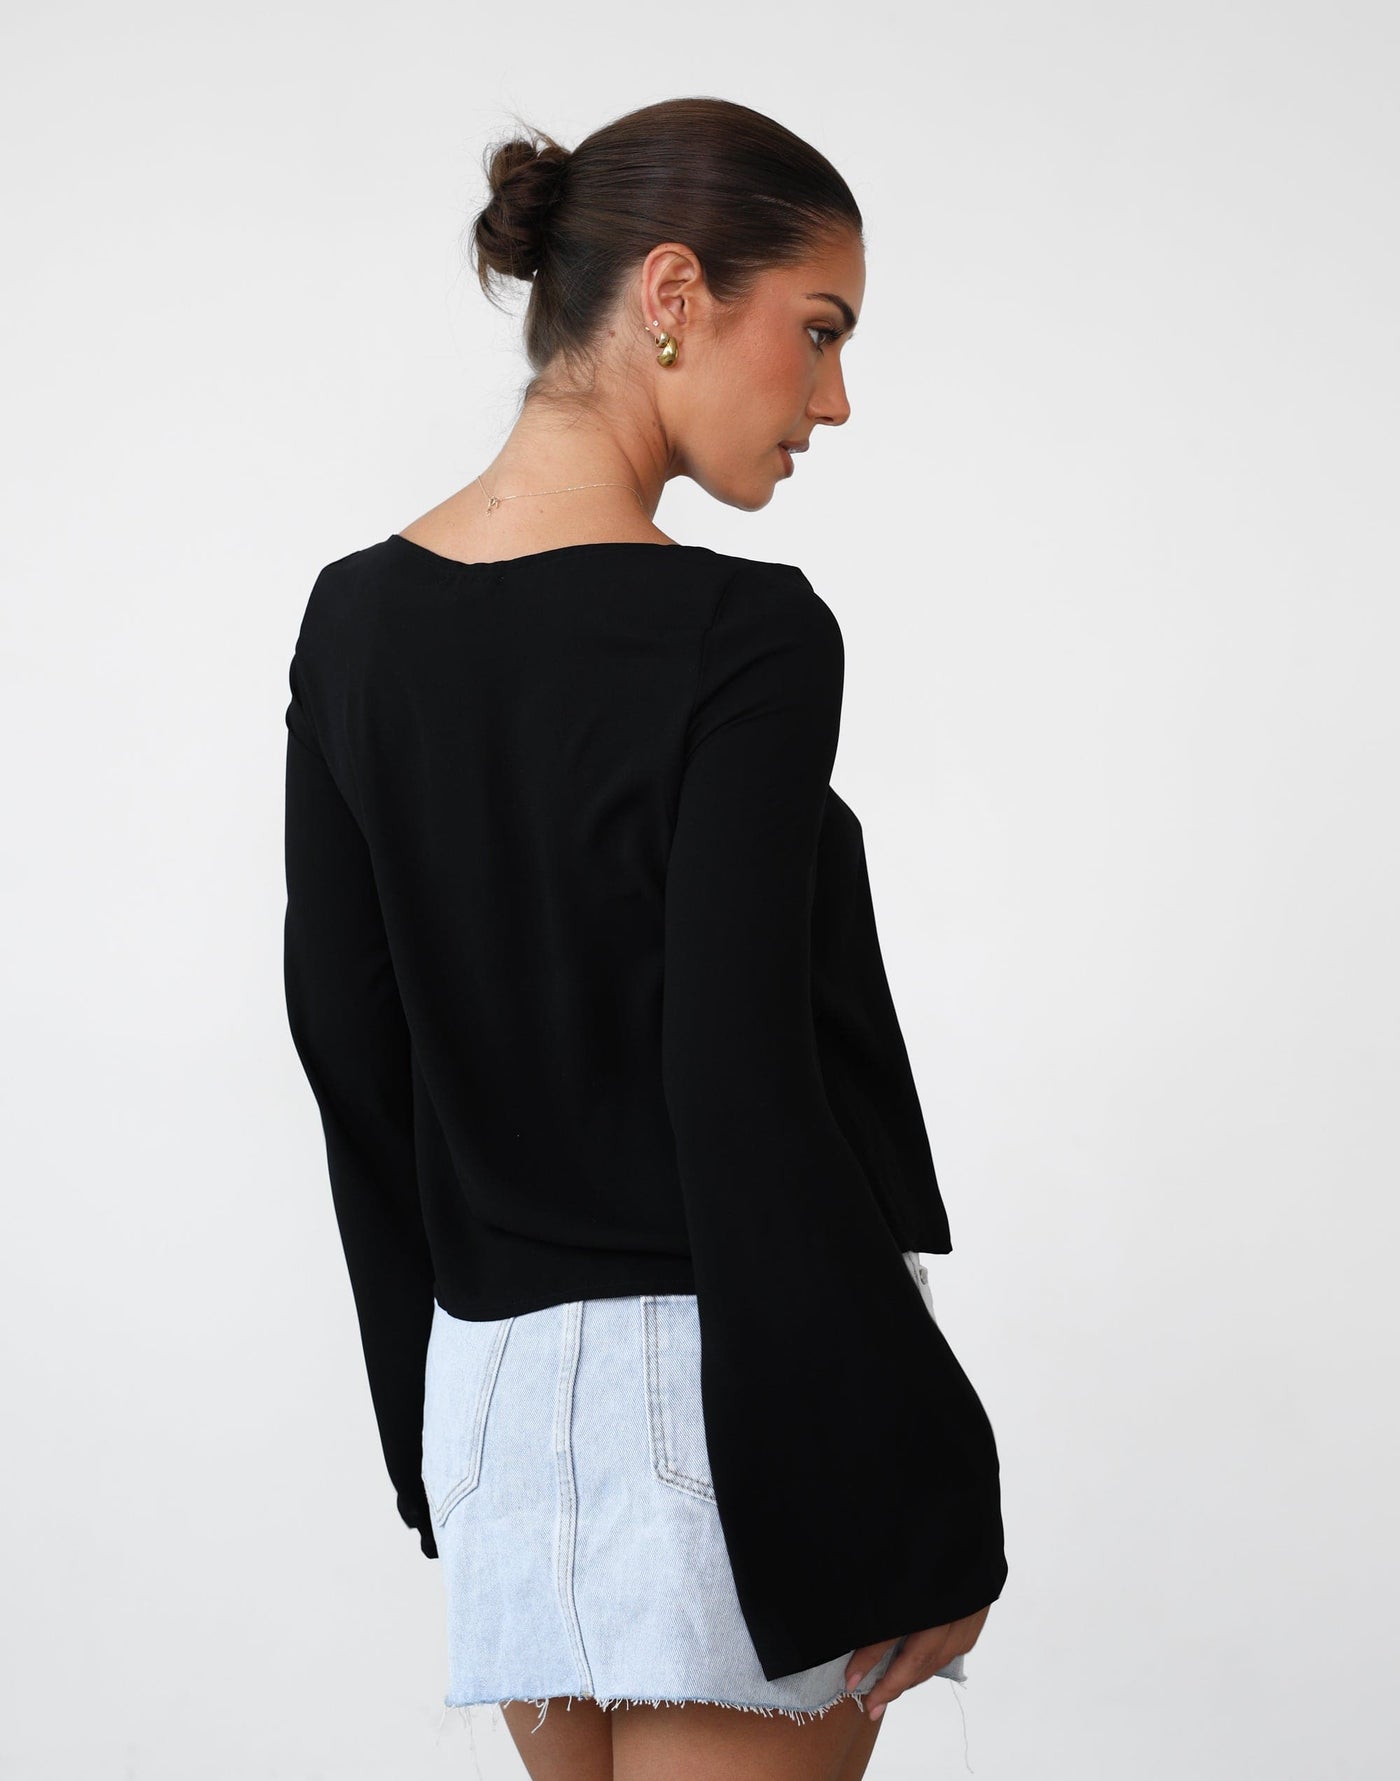 Tahiti Long Sleeve Top (Black) - Open Front Long Sleeve Top - Women's Top - Charcoal Clothing